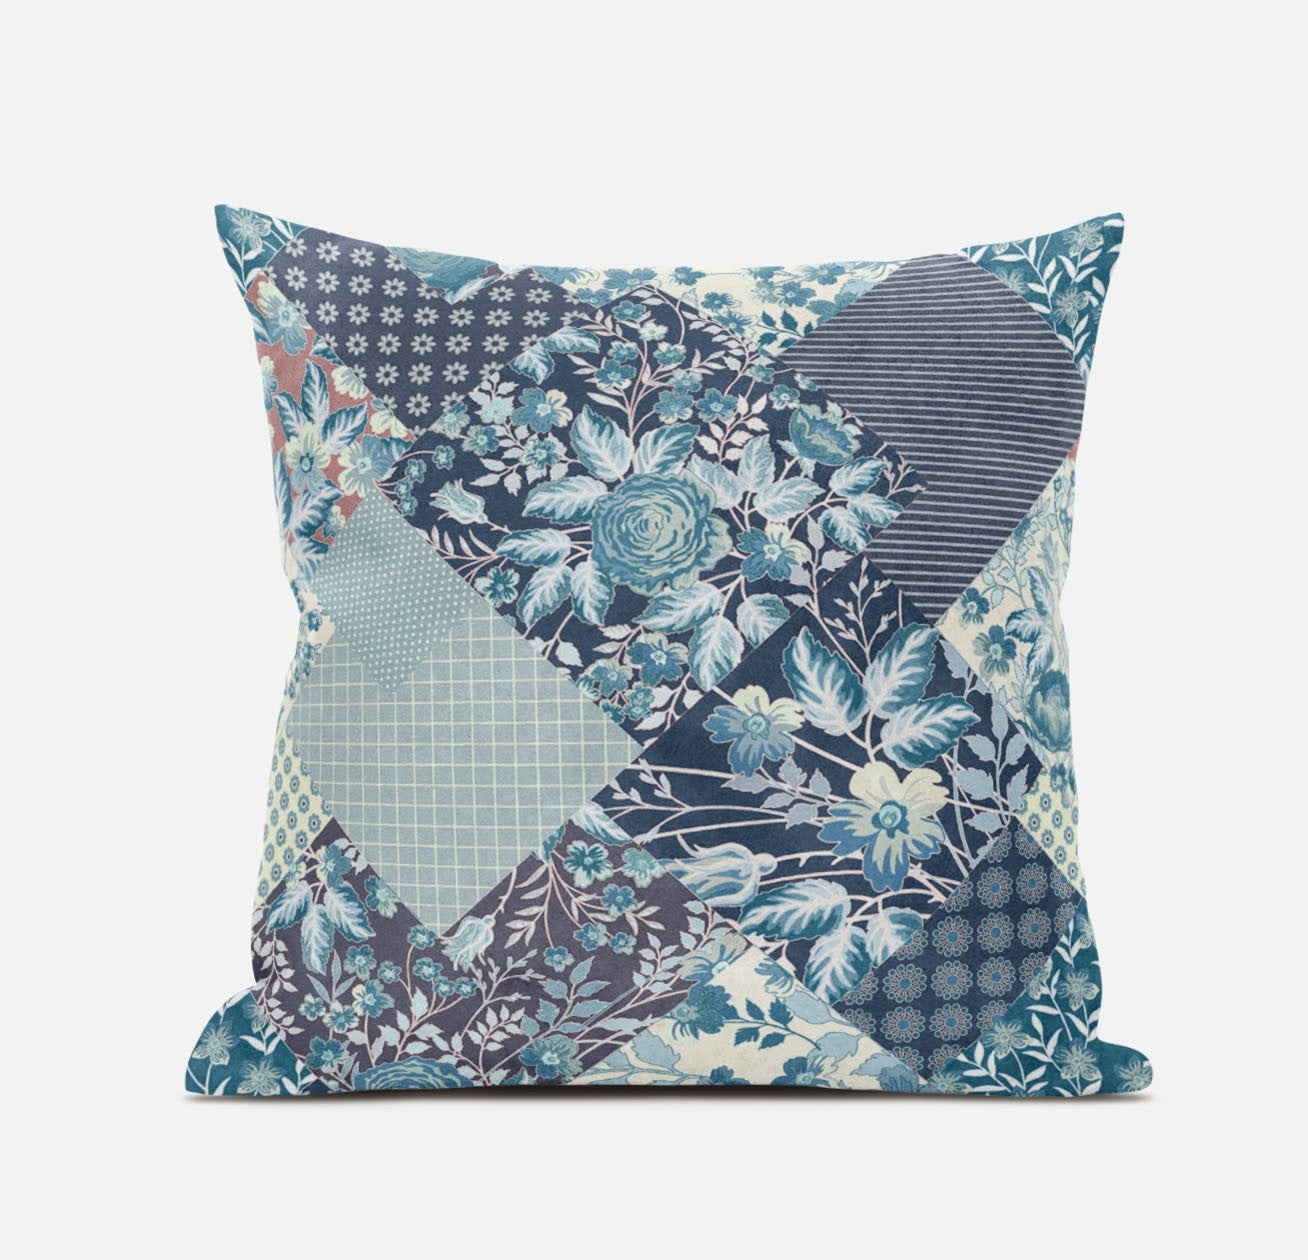 18" Blue White Floral Suede Throw Pillow